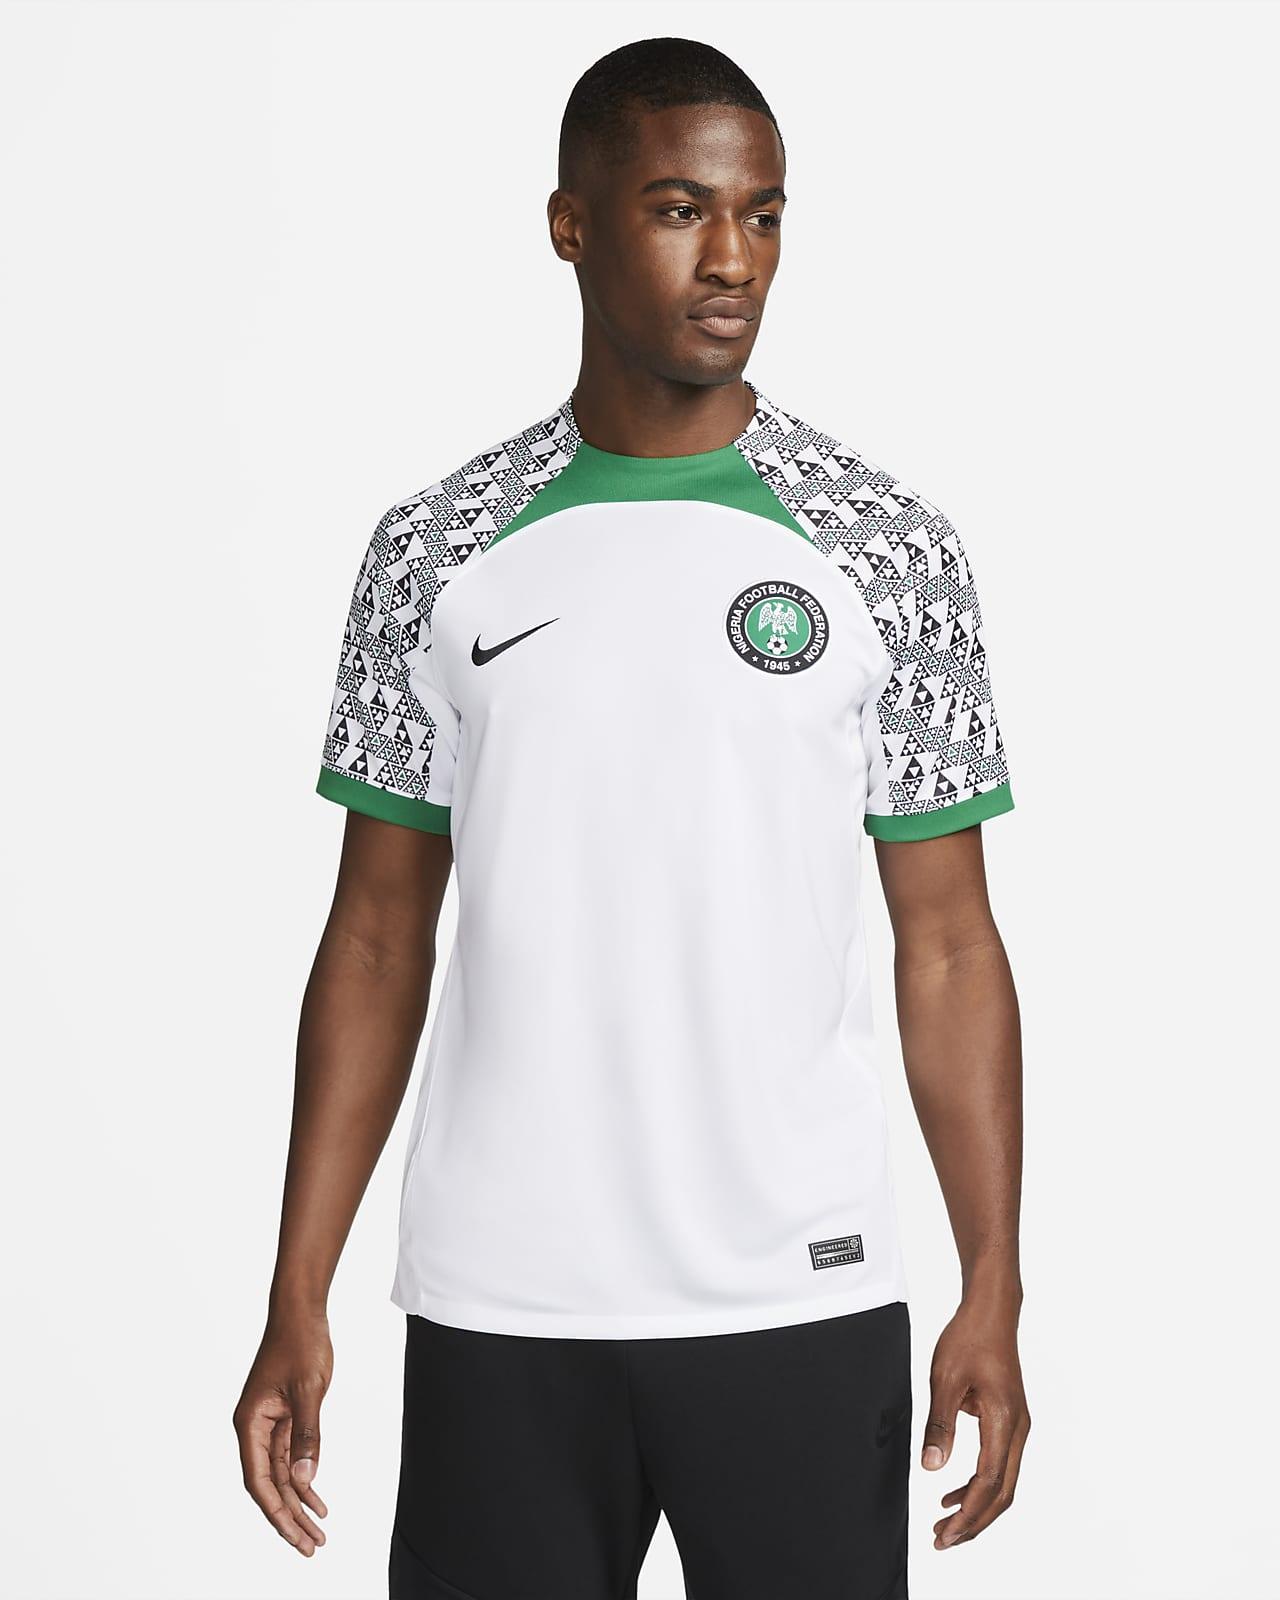 Nike launches new jerseys for Super Eagles NG